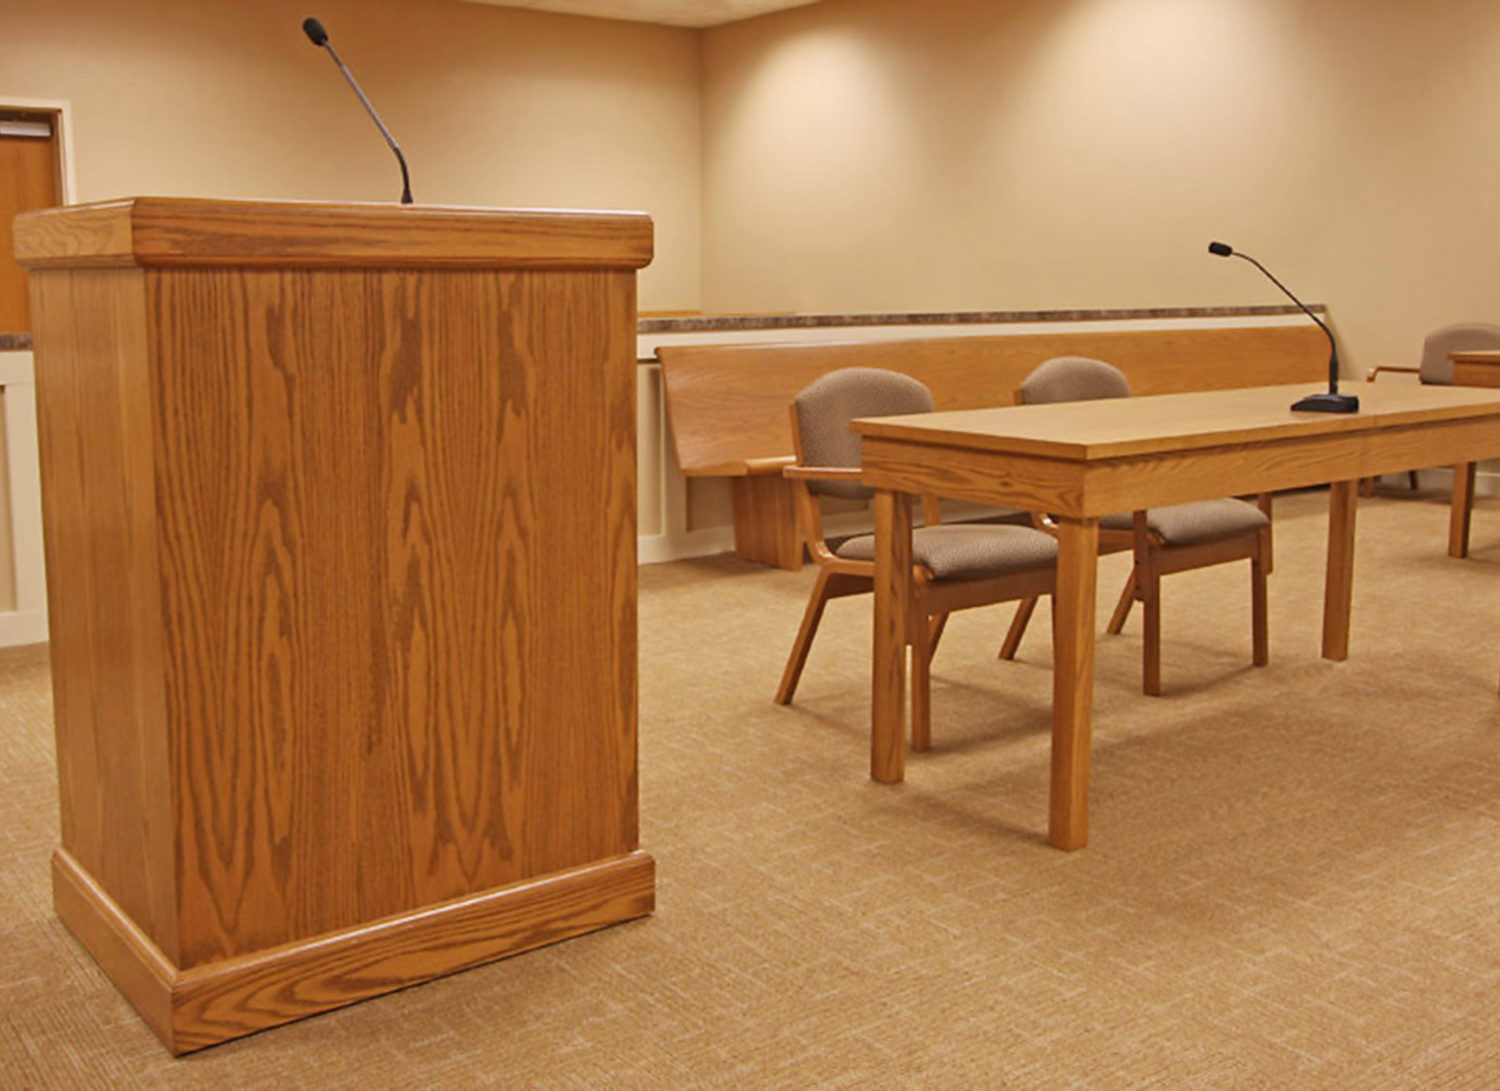 Lectern, Attorney Table and Plylok Chairs in Courtroom with All Wood Benches